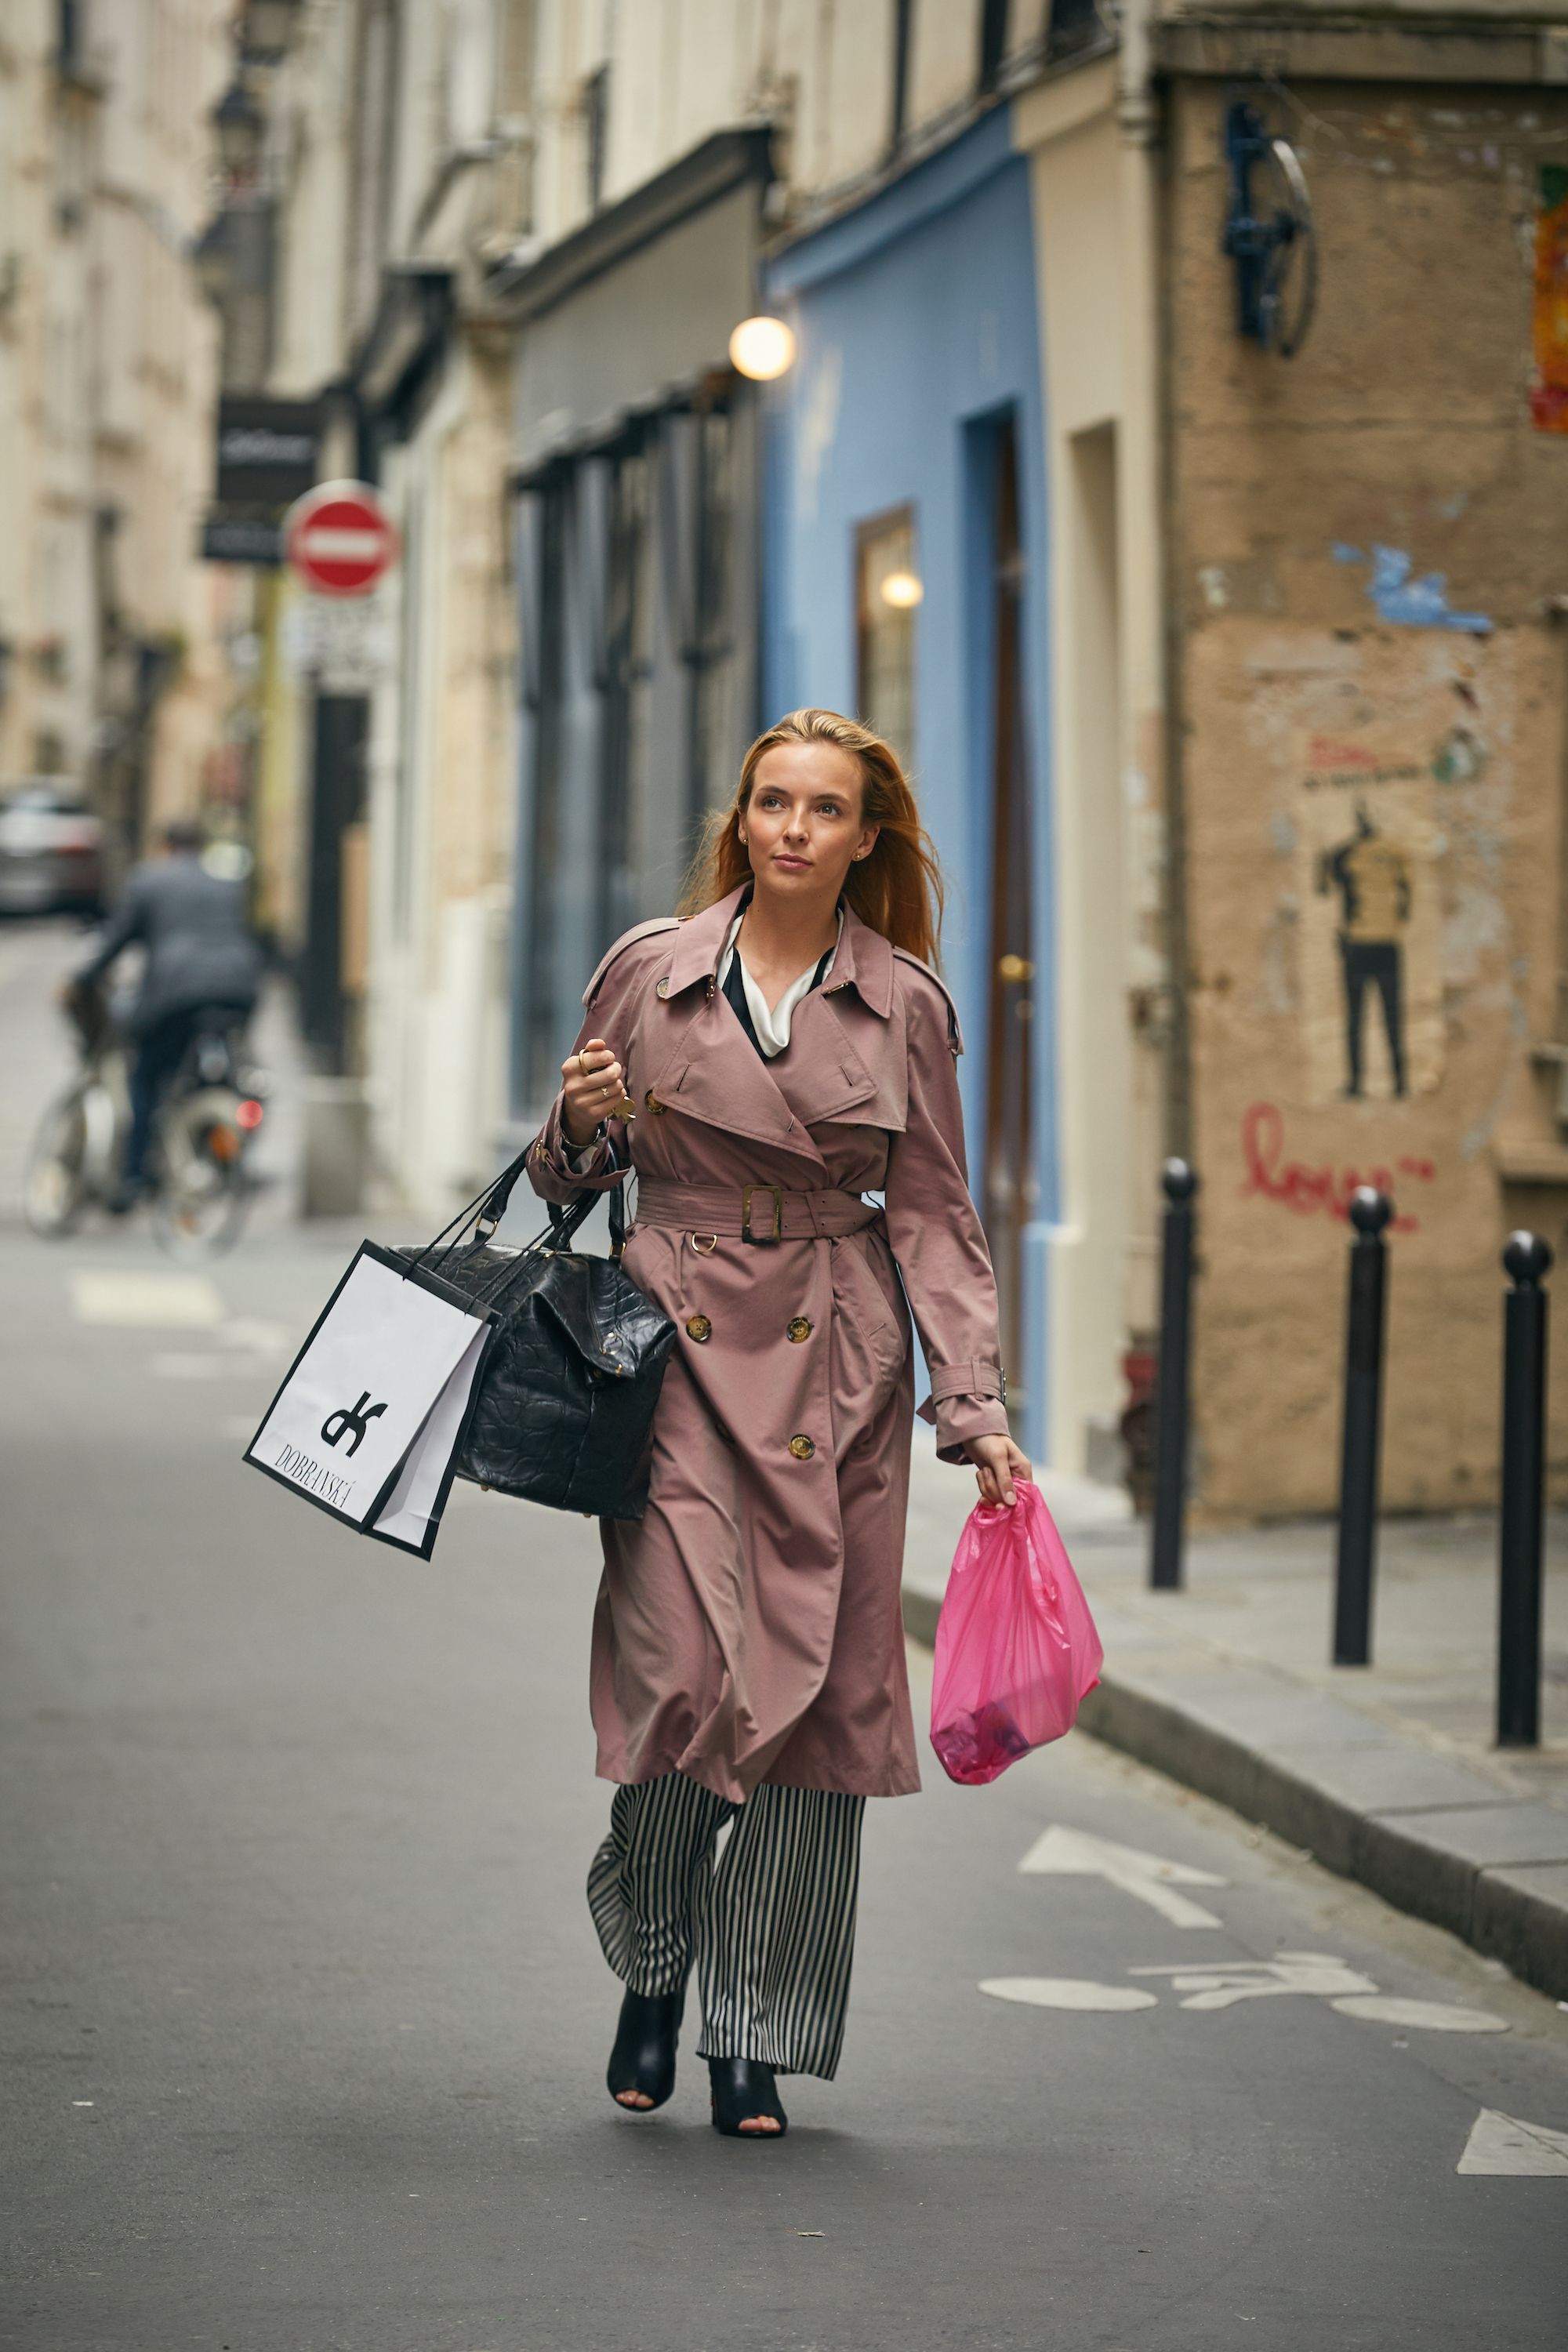 Memorable Fashion Moments From 'Killing Eve'